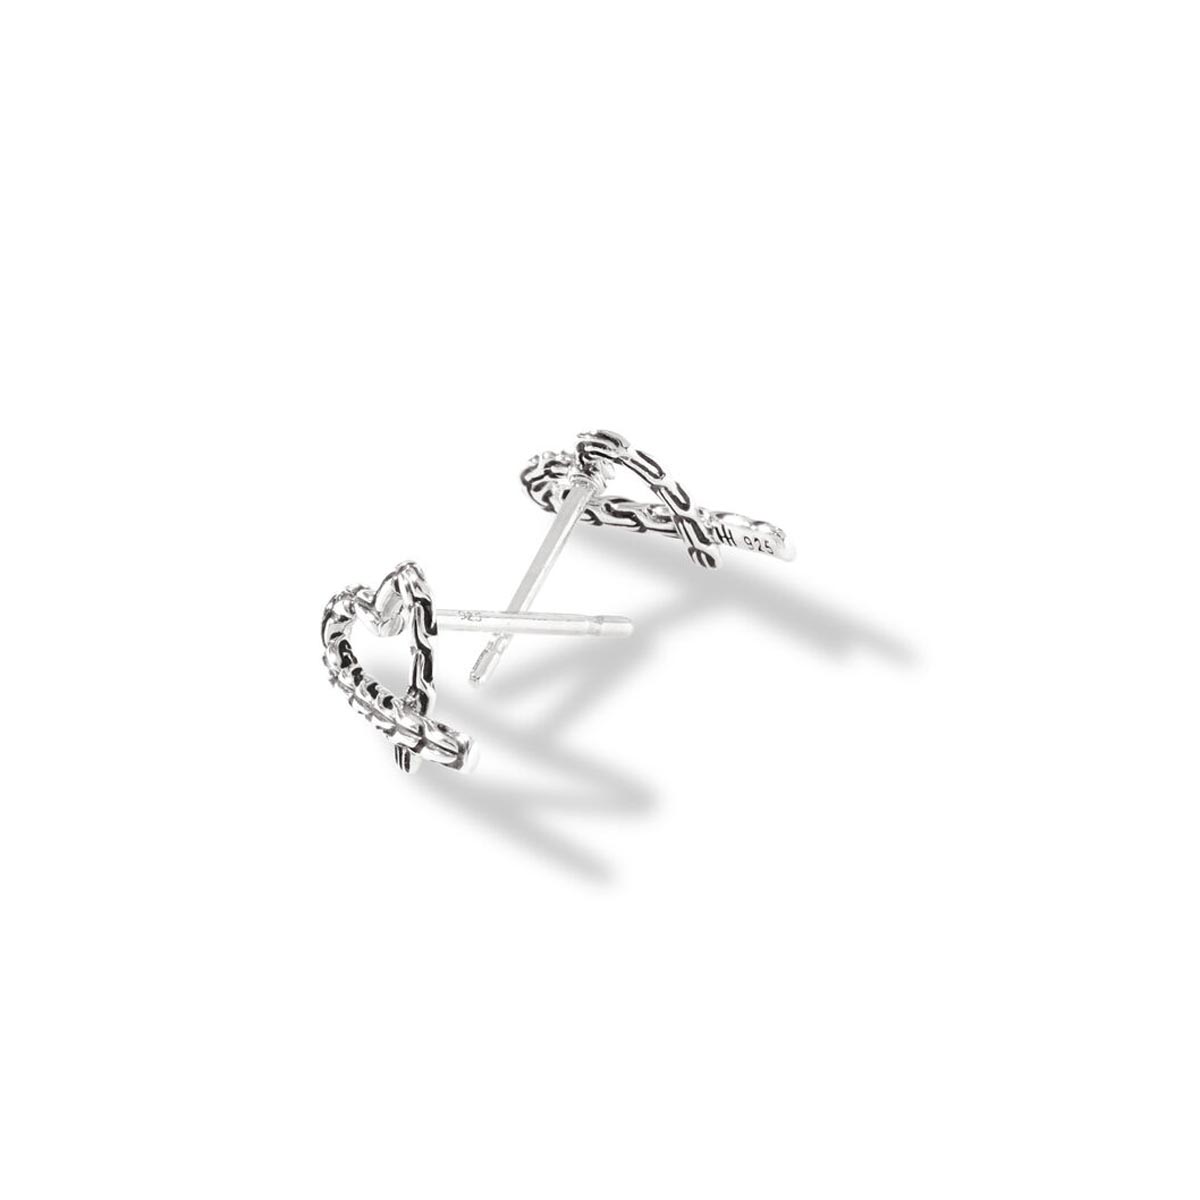 John Hardy Classic Chain Collection Manah Heart Stud Earrings in Sterling Silver